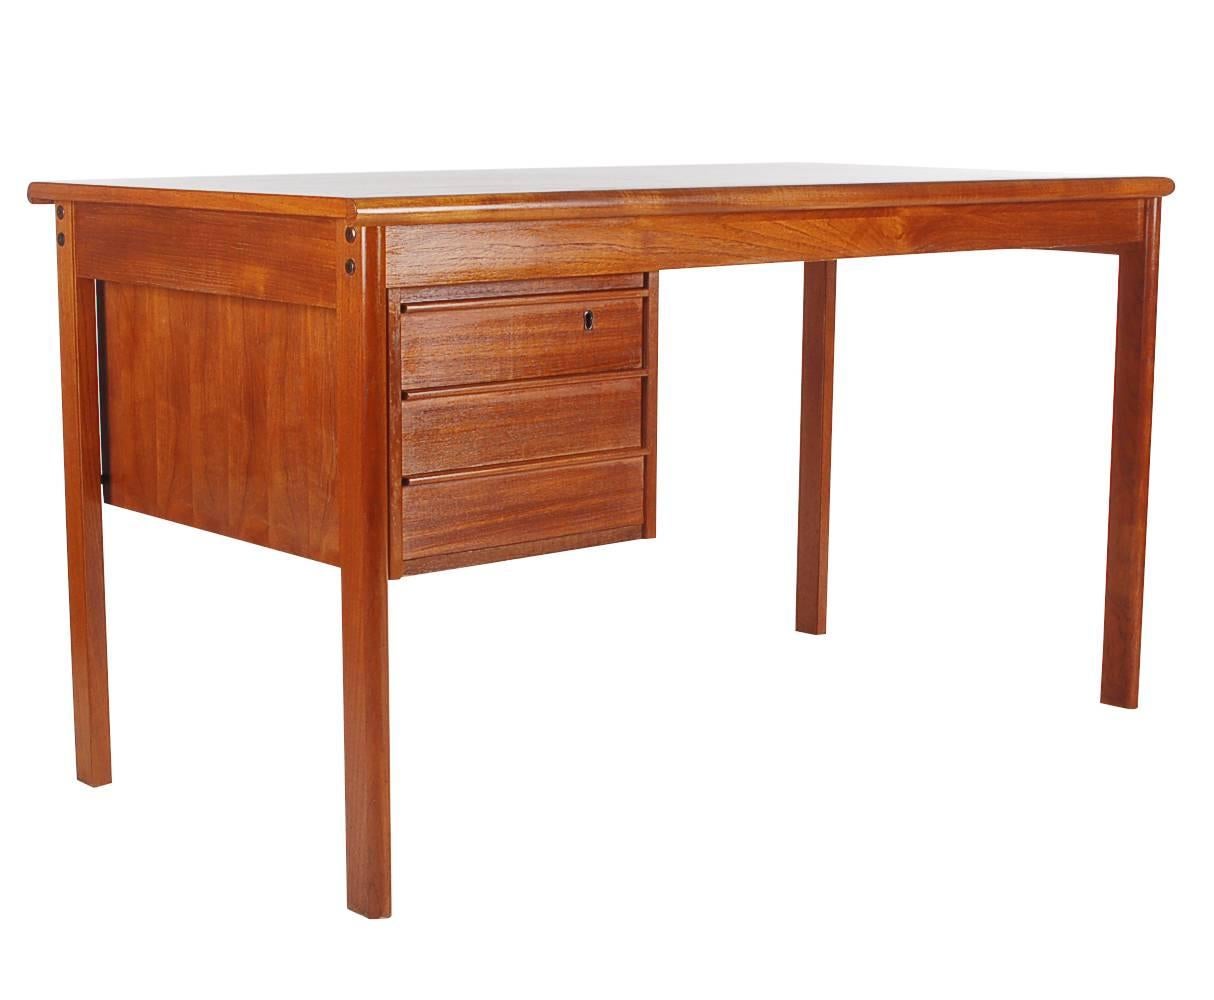 A wonderful and simply designed teak desk by Peter Lovig Nielsen for Dansk. It features teak construction, with a sliding top and hidden compartment. Manufactures makings. We currently have five matching desks available. Priced each.